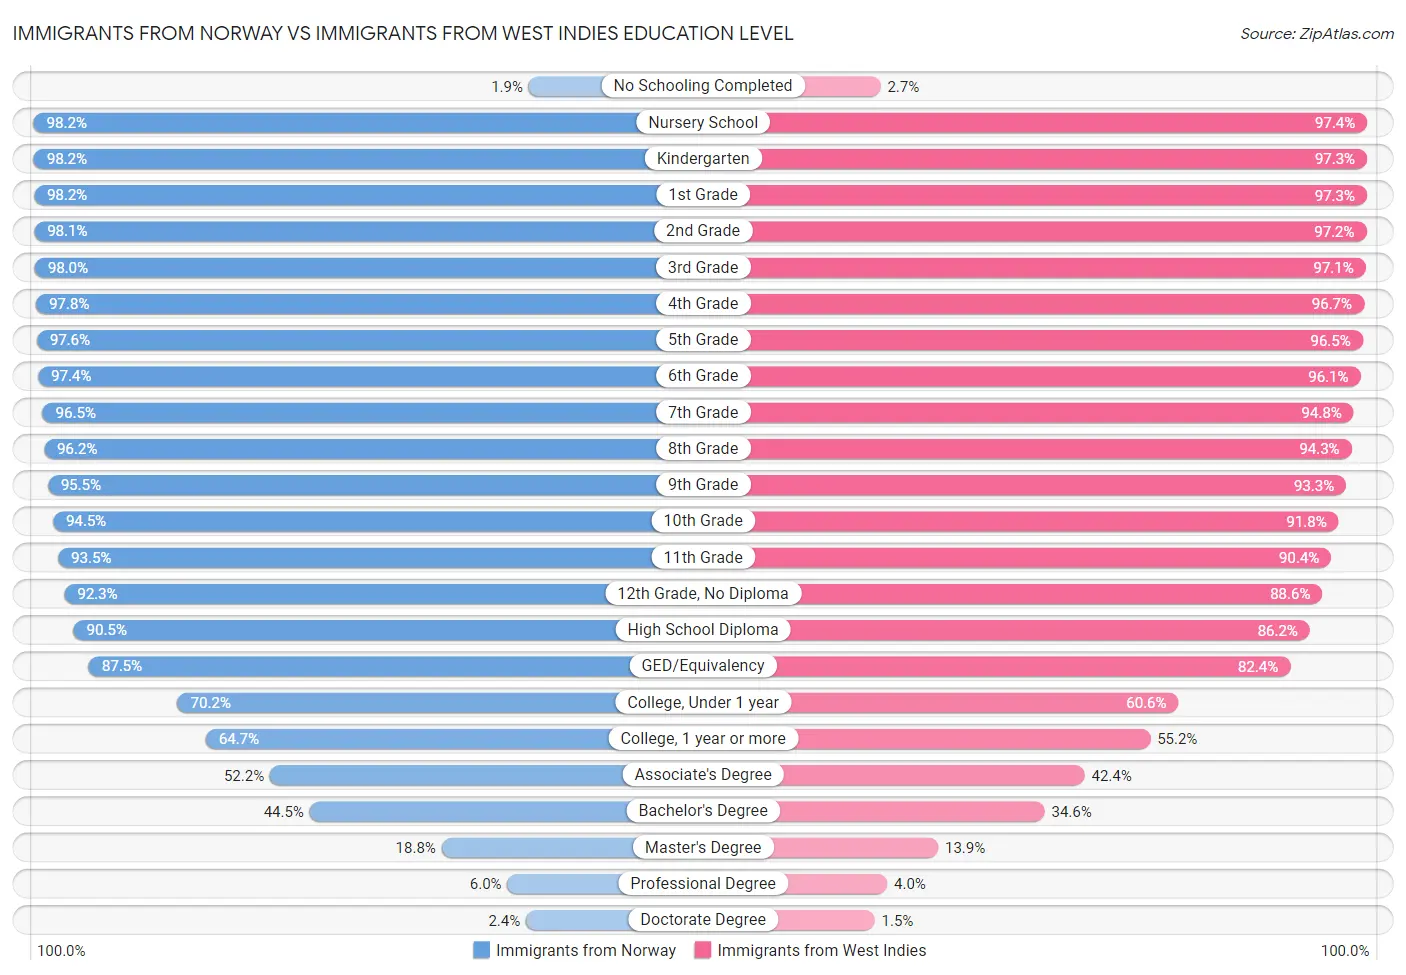 Immigrants from Norway vs Immigrants from West Indies Education Level